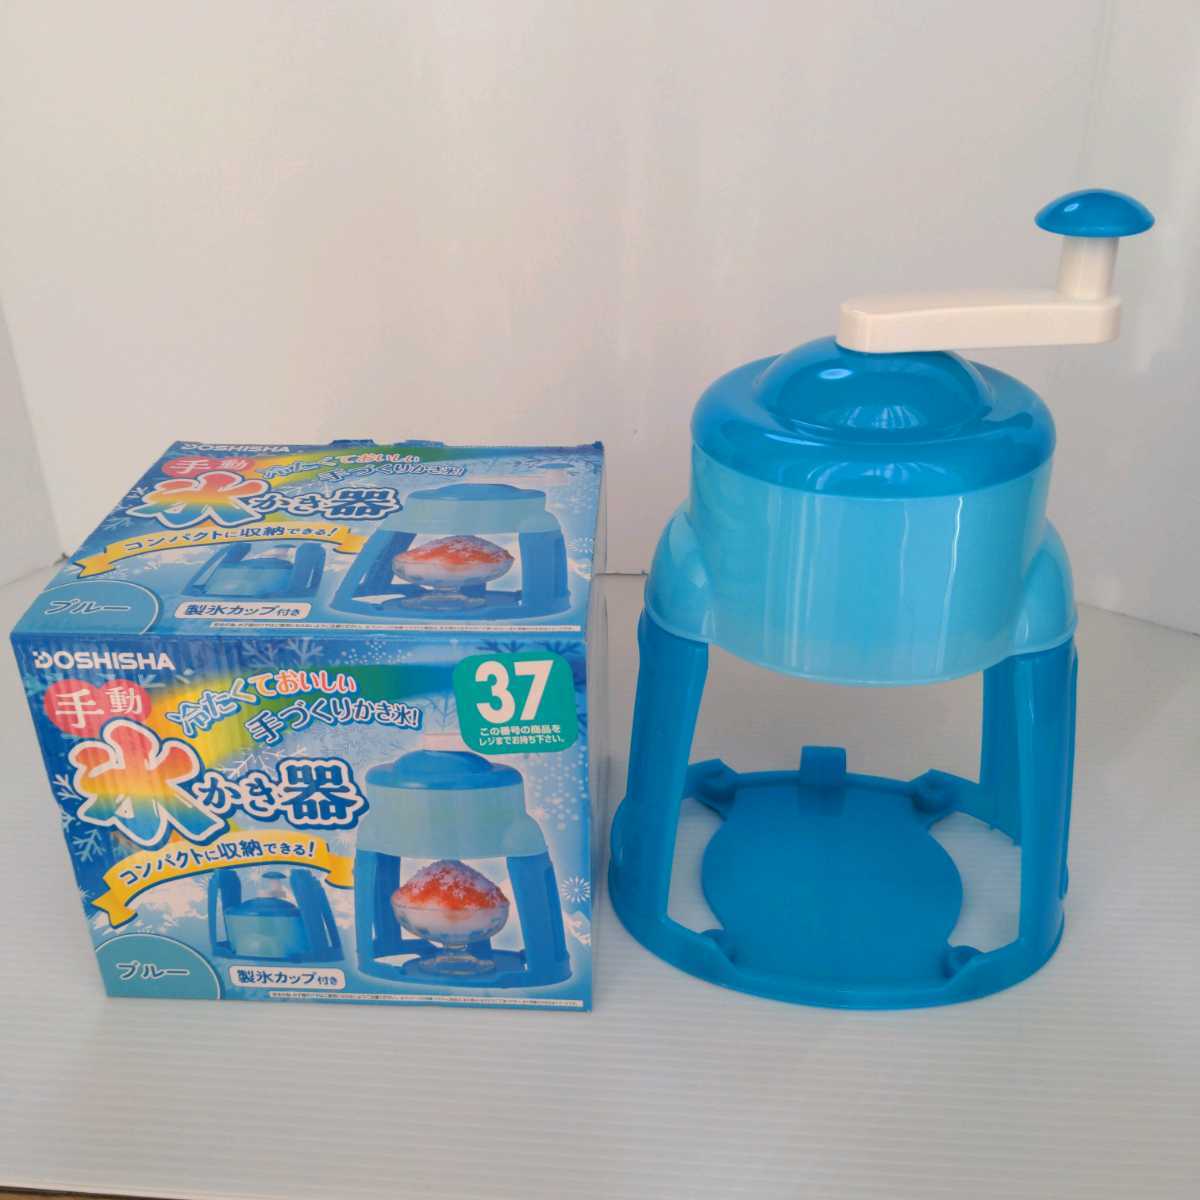 do cow car ice chipping machine chip ice machine tropical blue manual ice shaving vessel compact blue icemaker cup attaching icemaker cup M size DOSHISHA